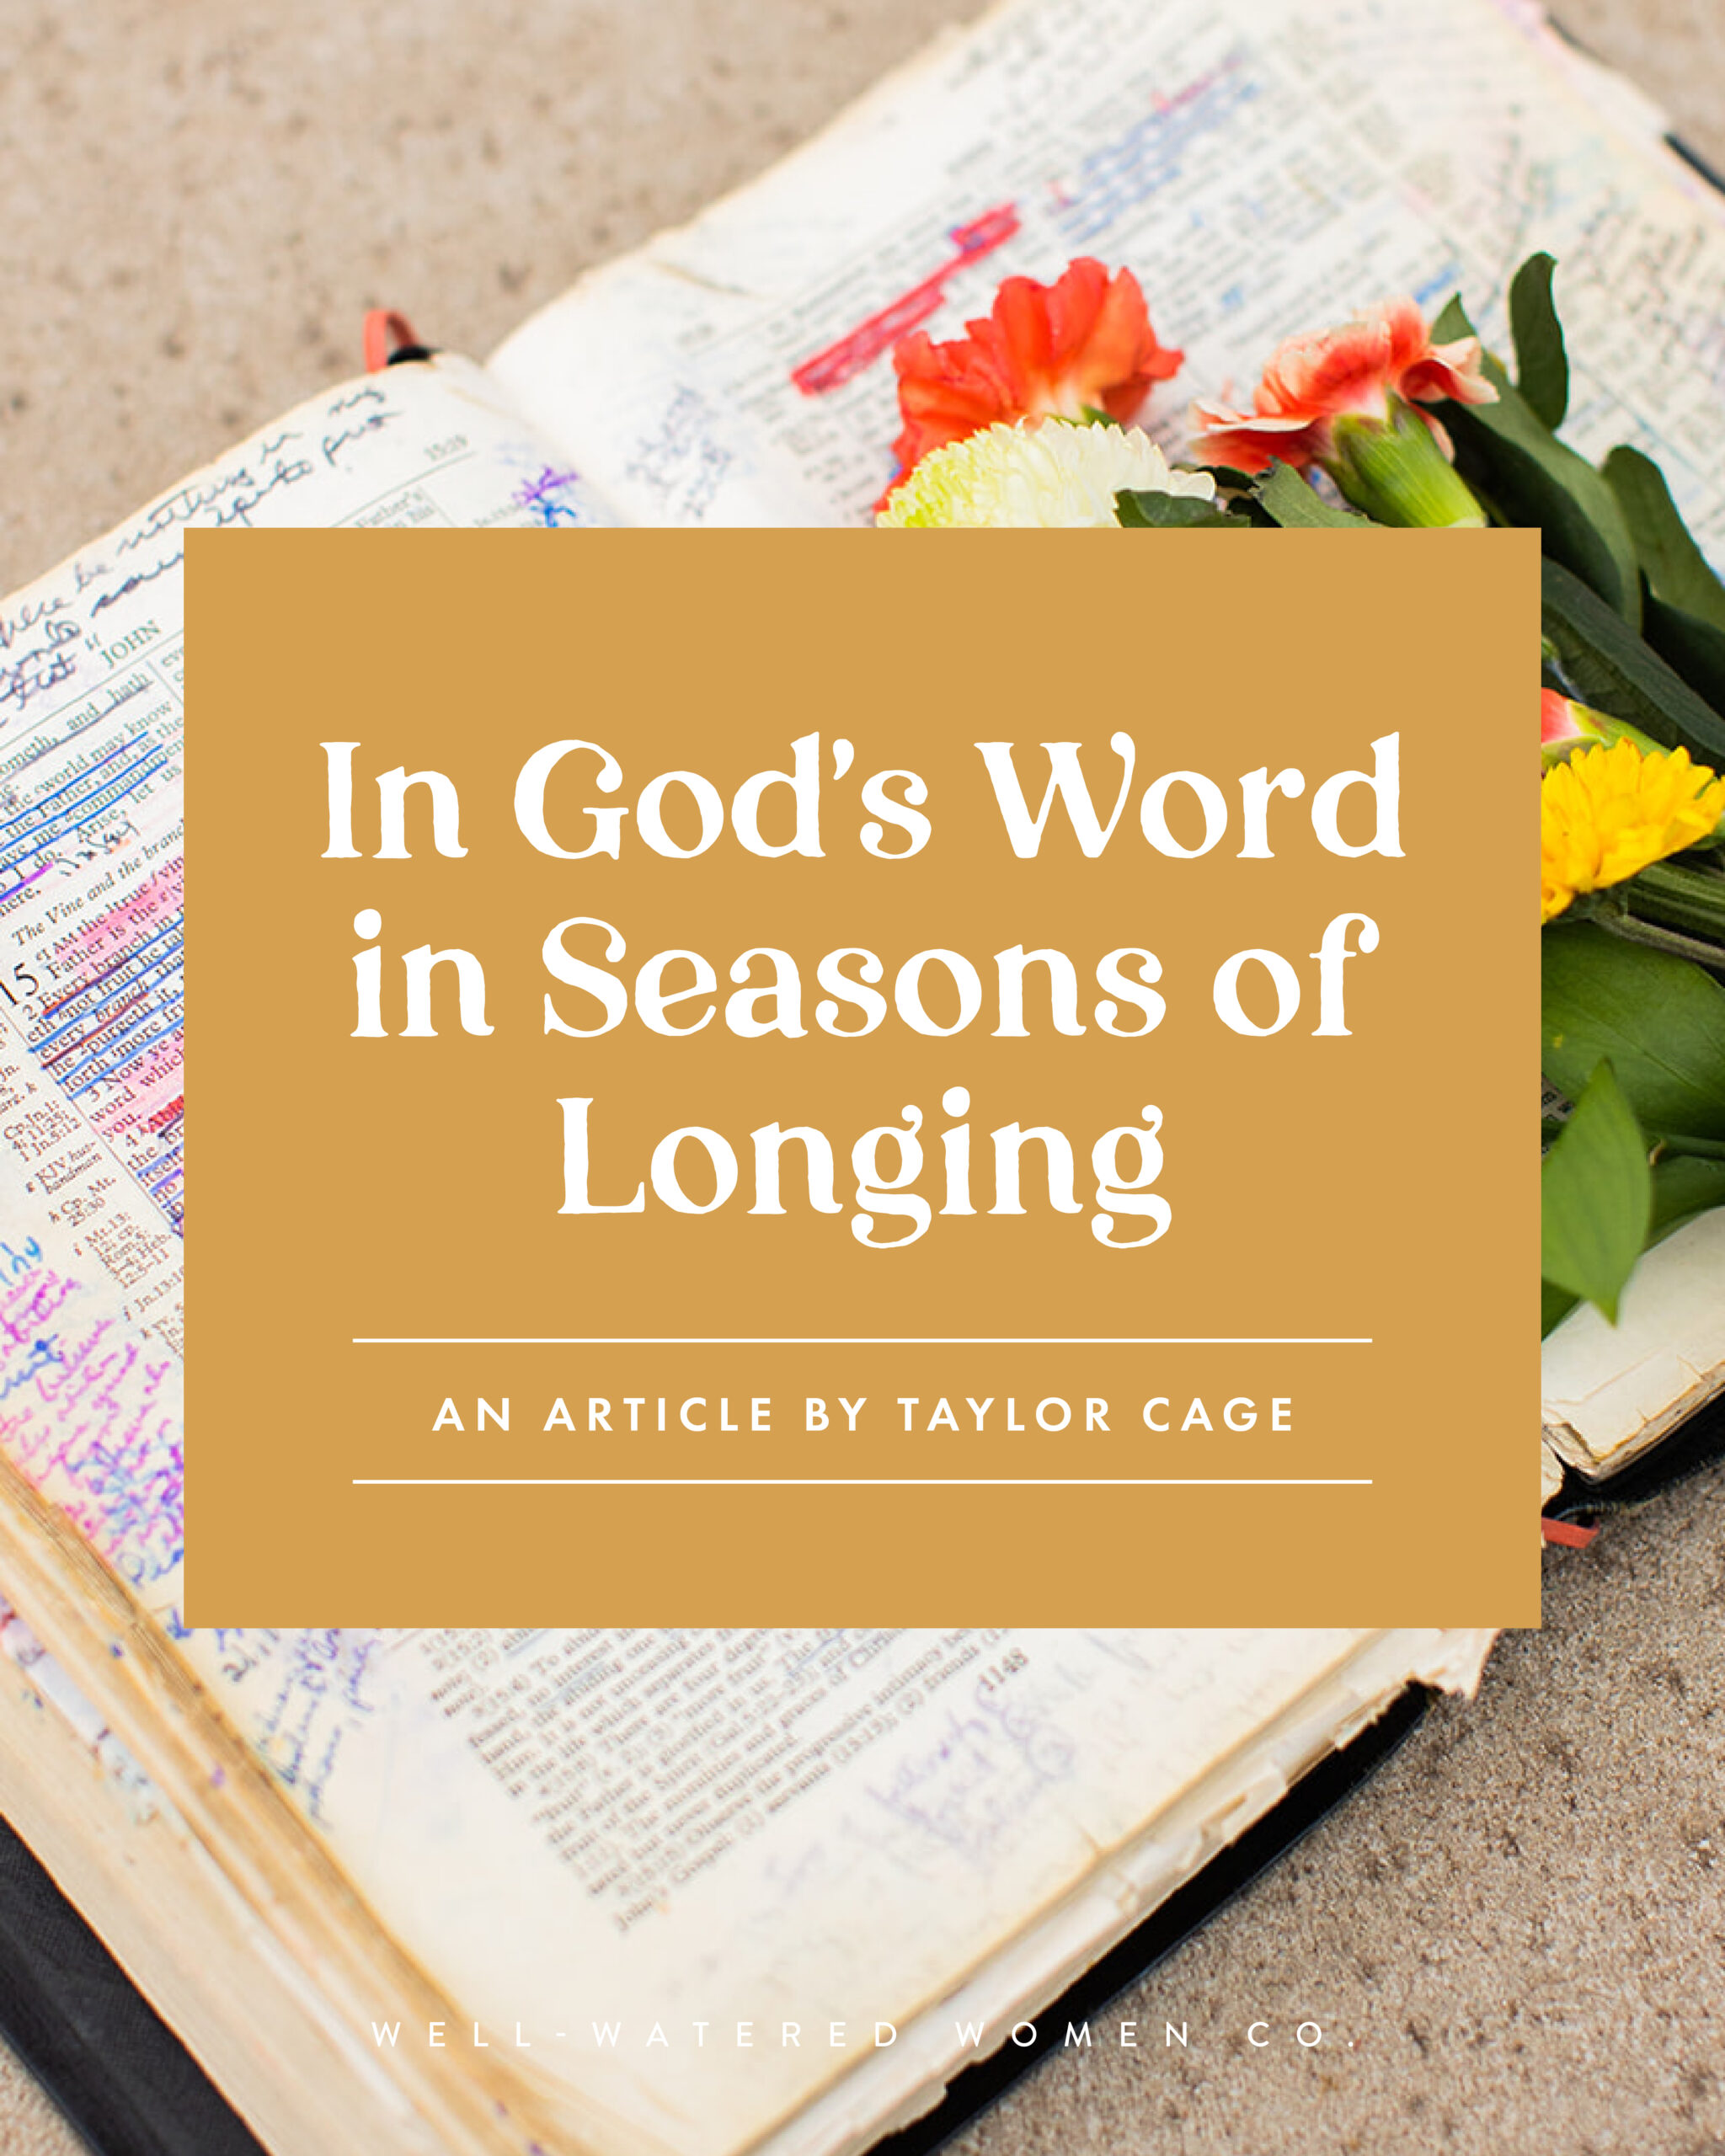 In God's Word in Seasons of Longing - an article from Well-Watered Women